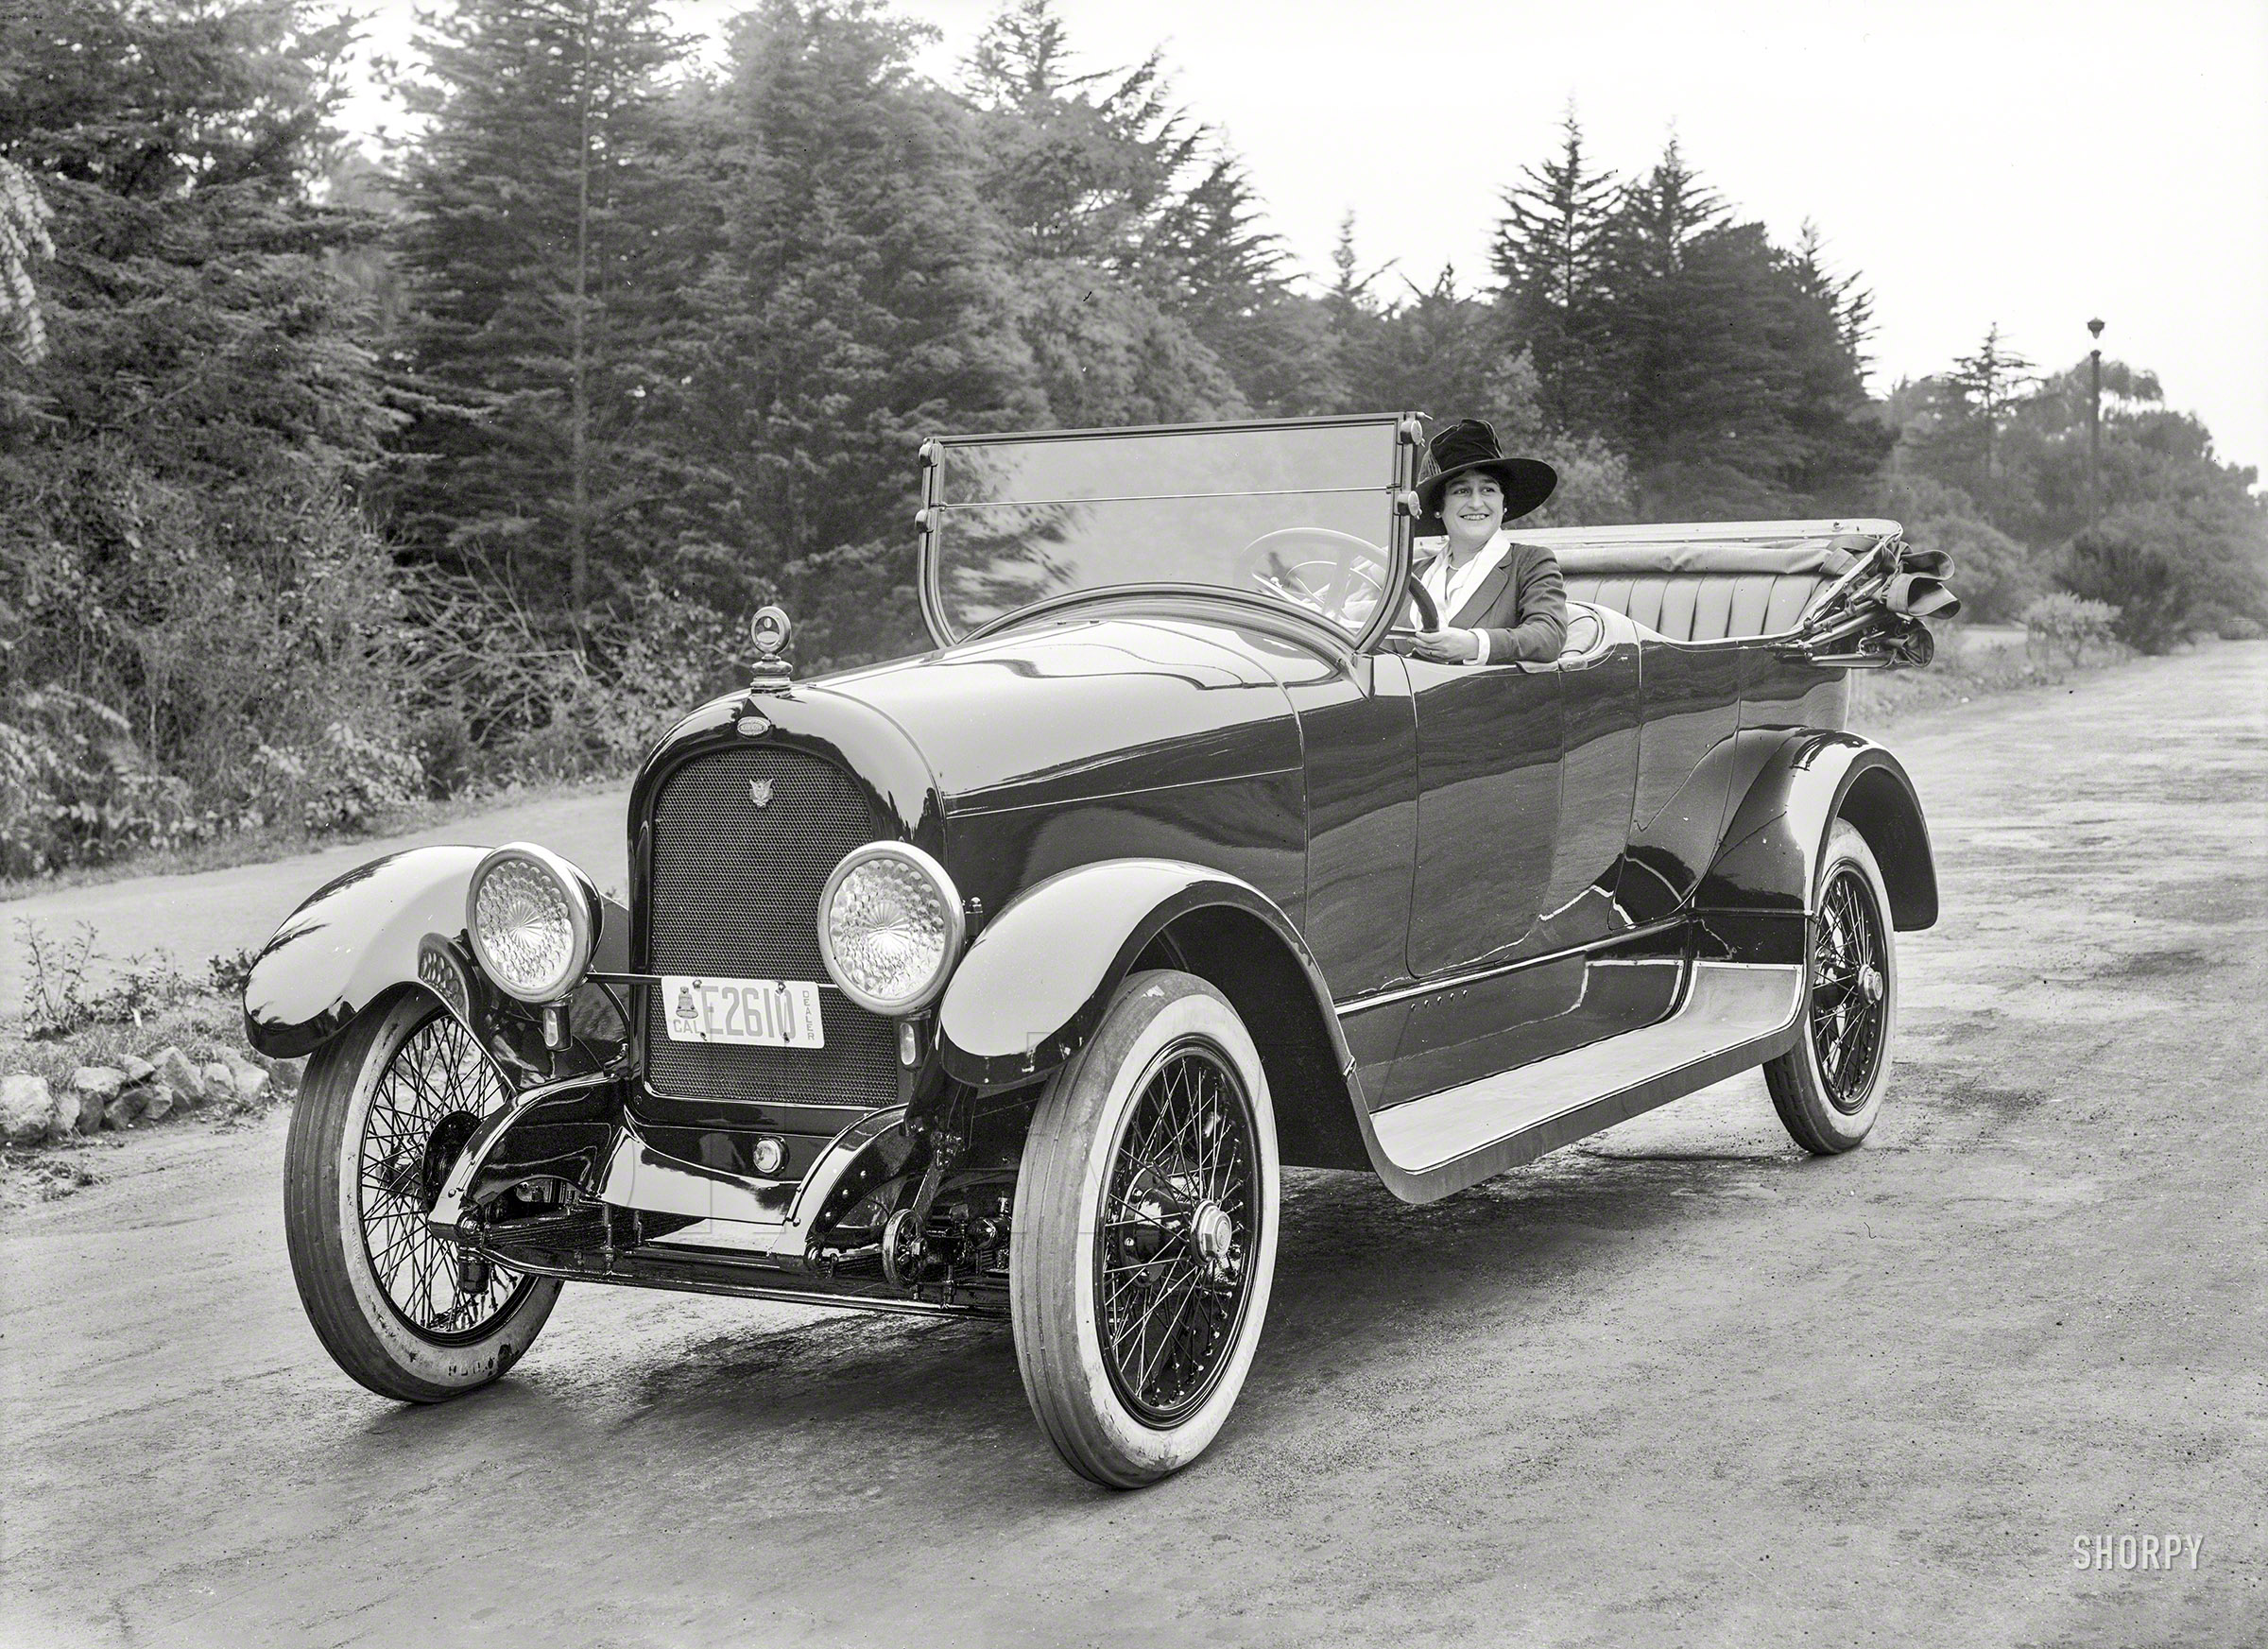 "Marmon touring car, San Francisco, 1918." Latest entry in the Shorpy Index of Ill-Fated Phaetons. 5x7 glass negative by Christopher Helin. View full size.